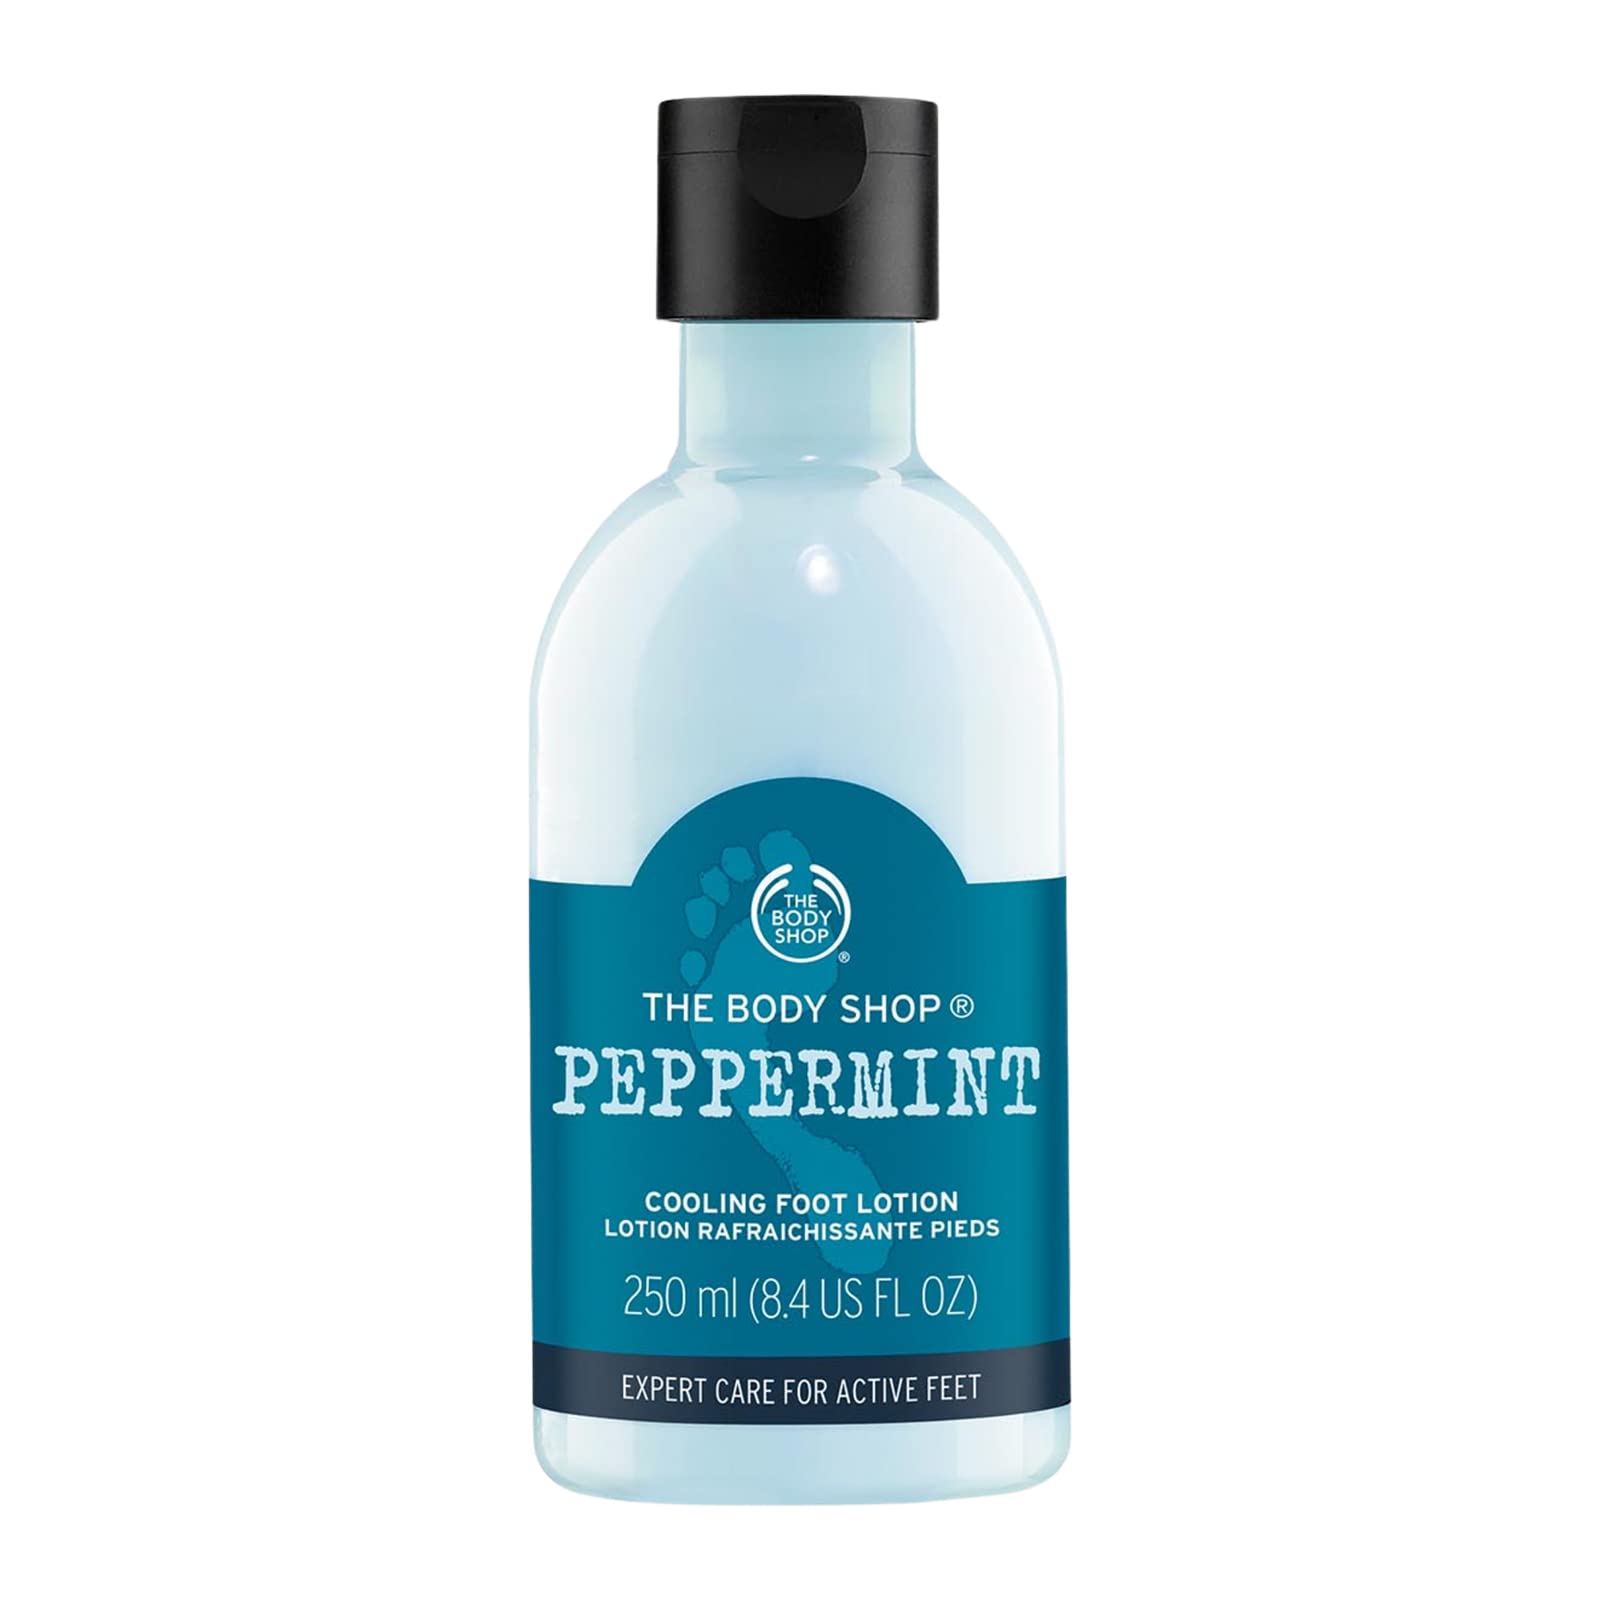 The Body Shop Peppermint Cooling Foot Lotion – For Tired Feet – 8.4 oz